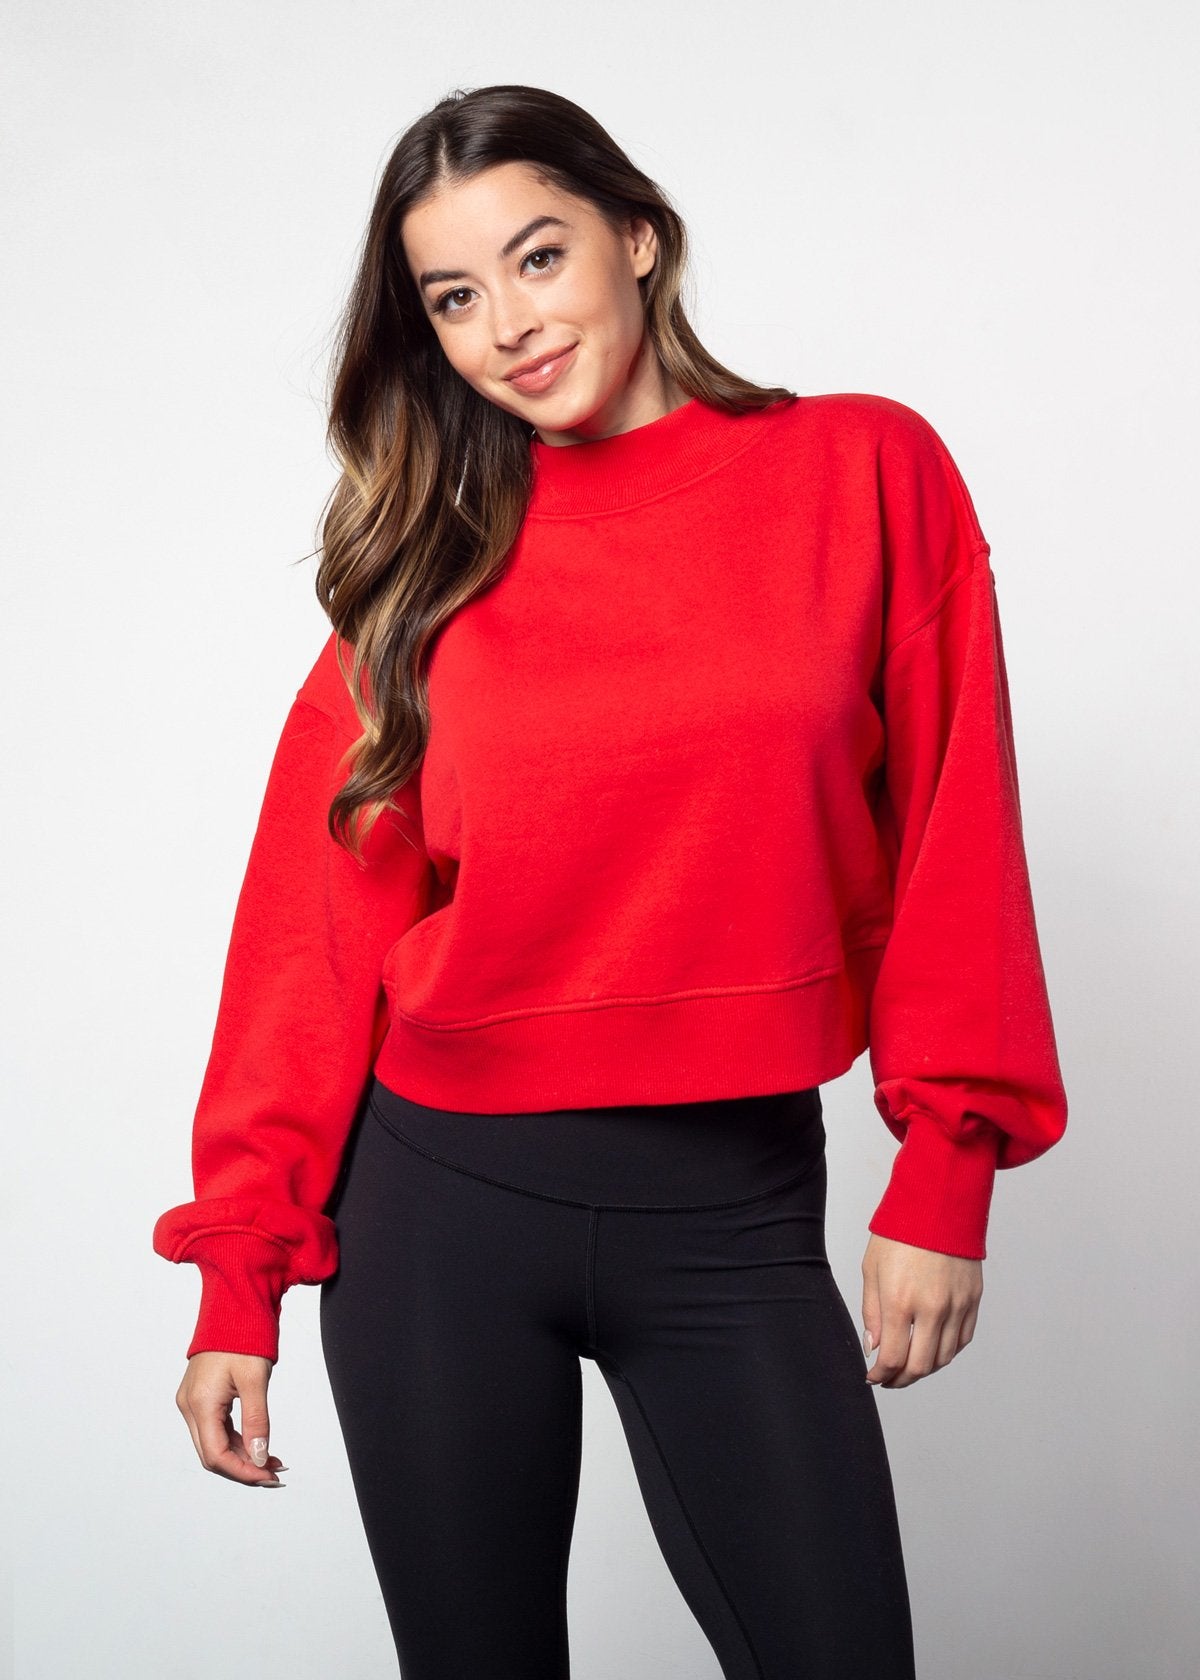 Red mockneck sweatshirt with dropped shoulders, balloon sleeves, ribbed neck, sleeves and hem. Cropped relaxed silhouette